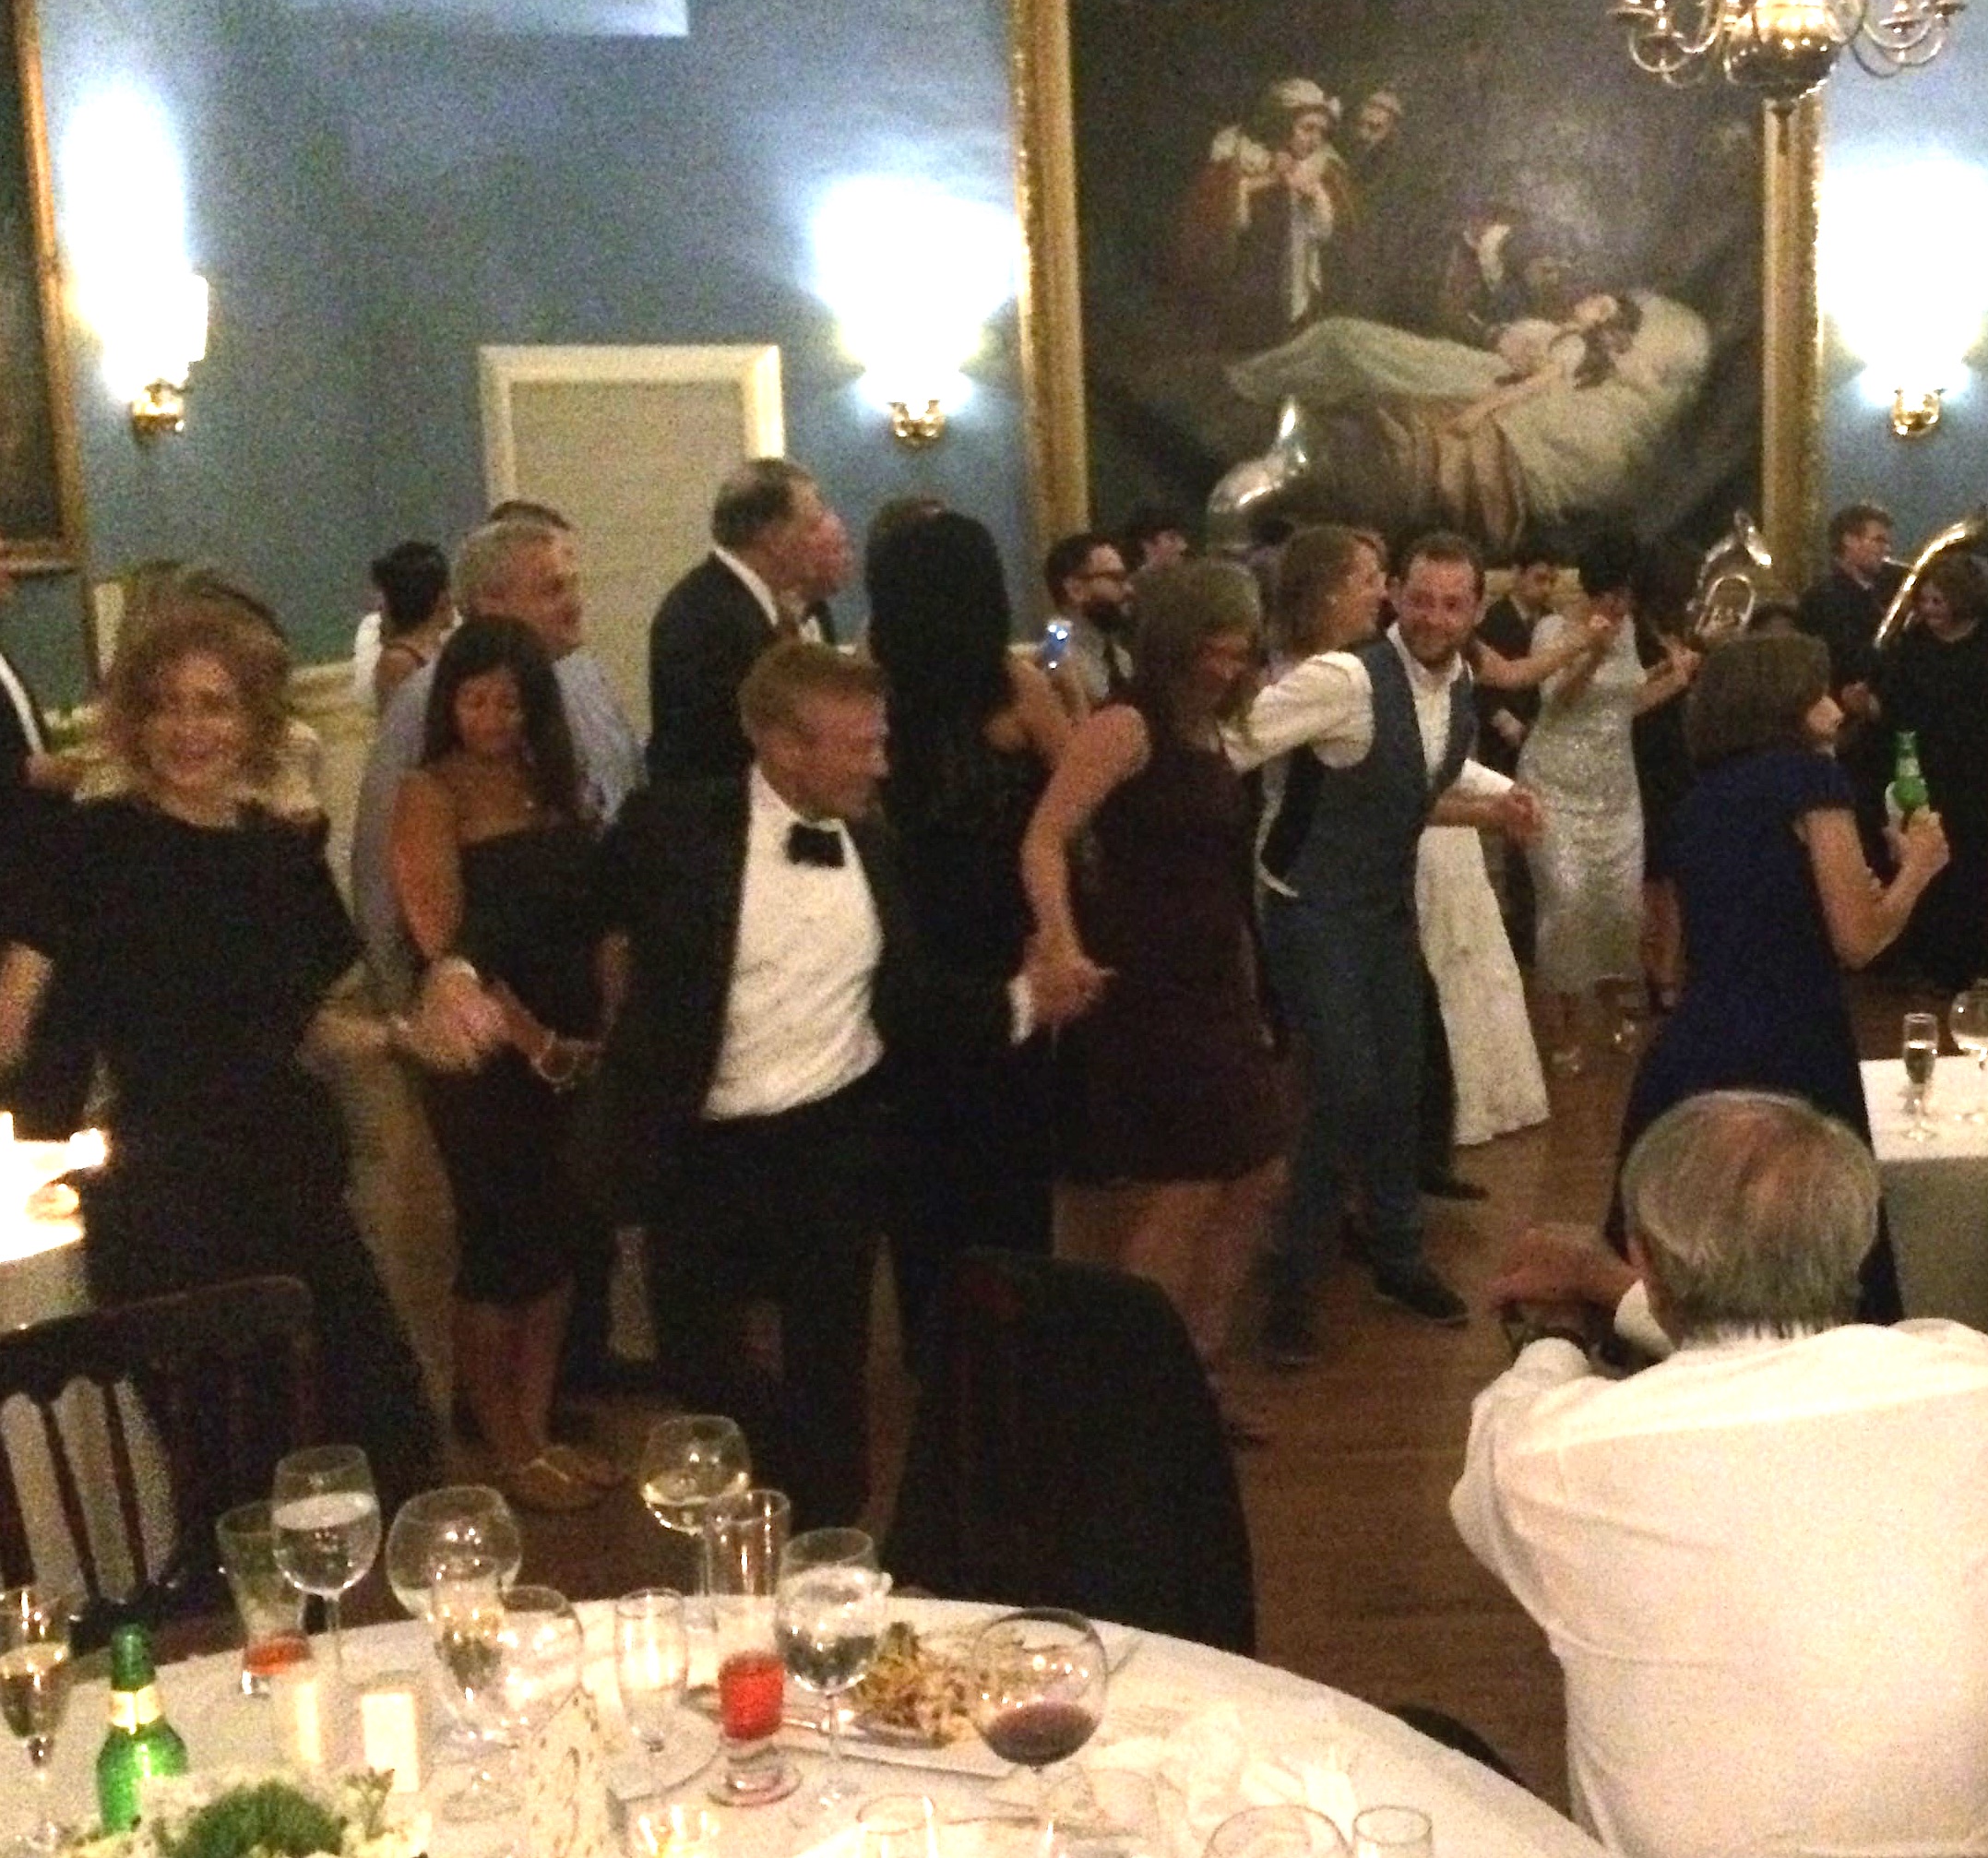 At Sasha's and James' wedding, there was much music and just as much dancing.